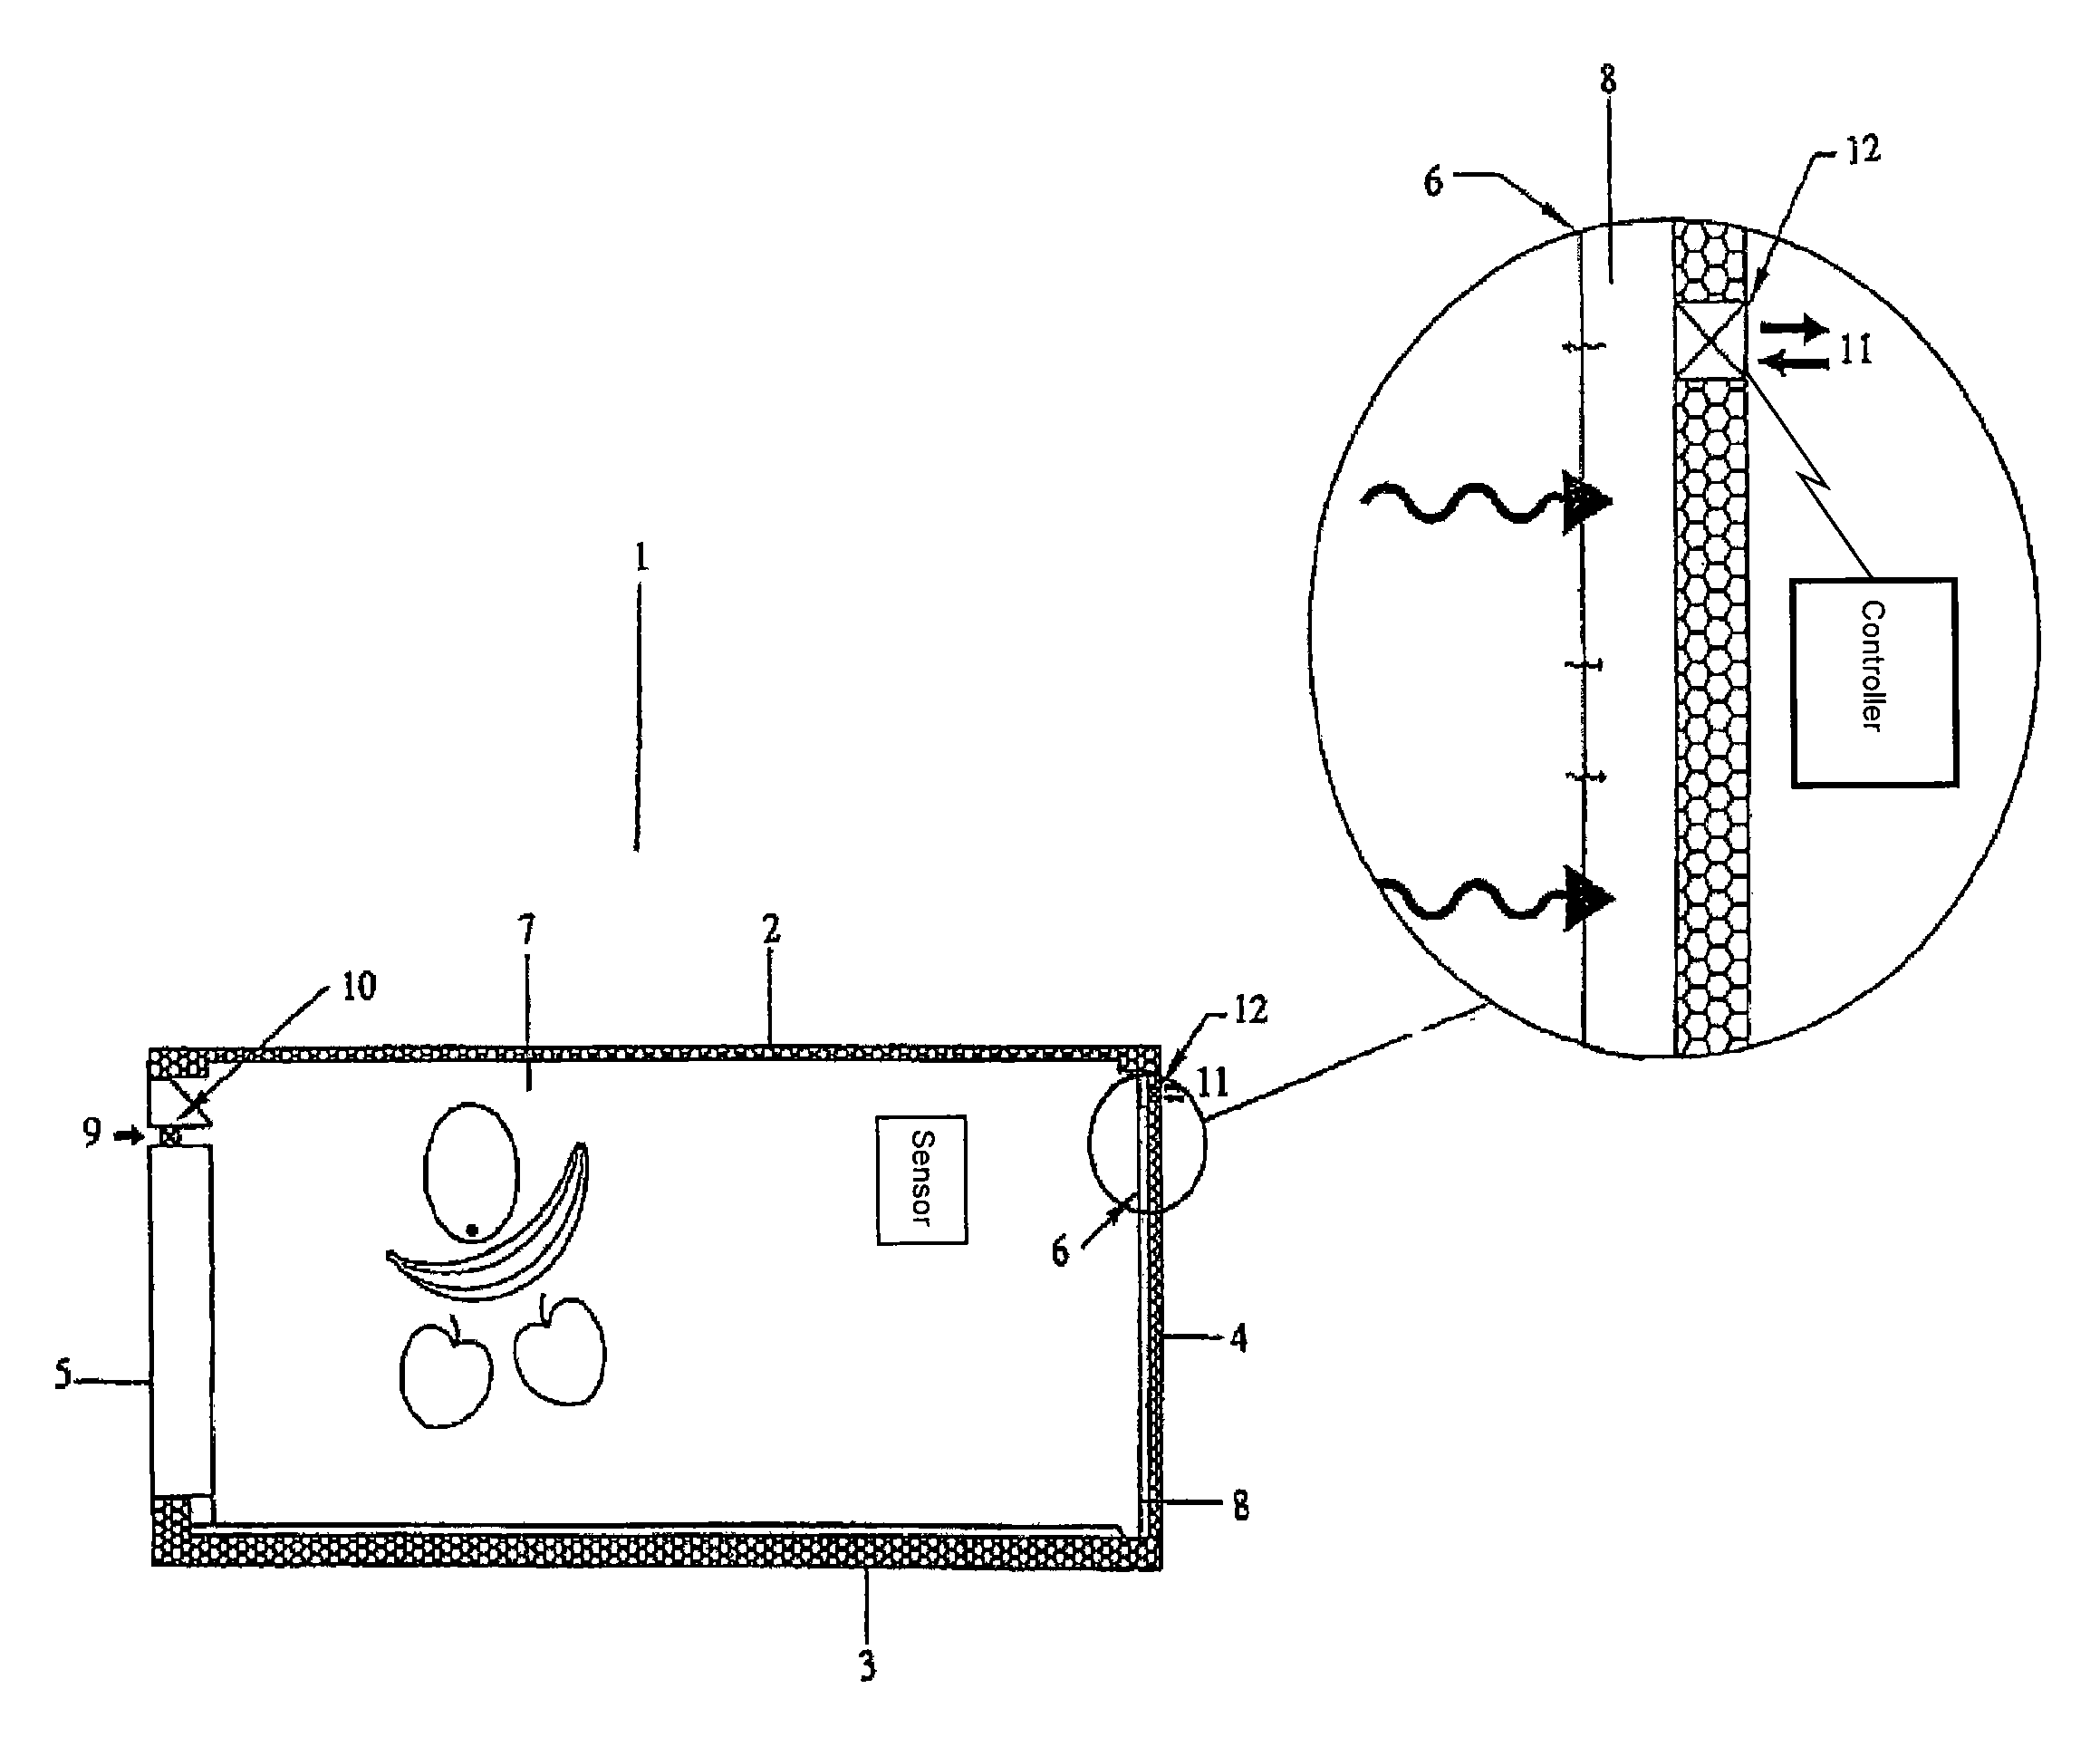 Apparatus for controlling the composition of gases within a container